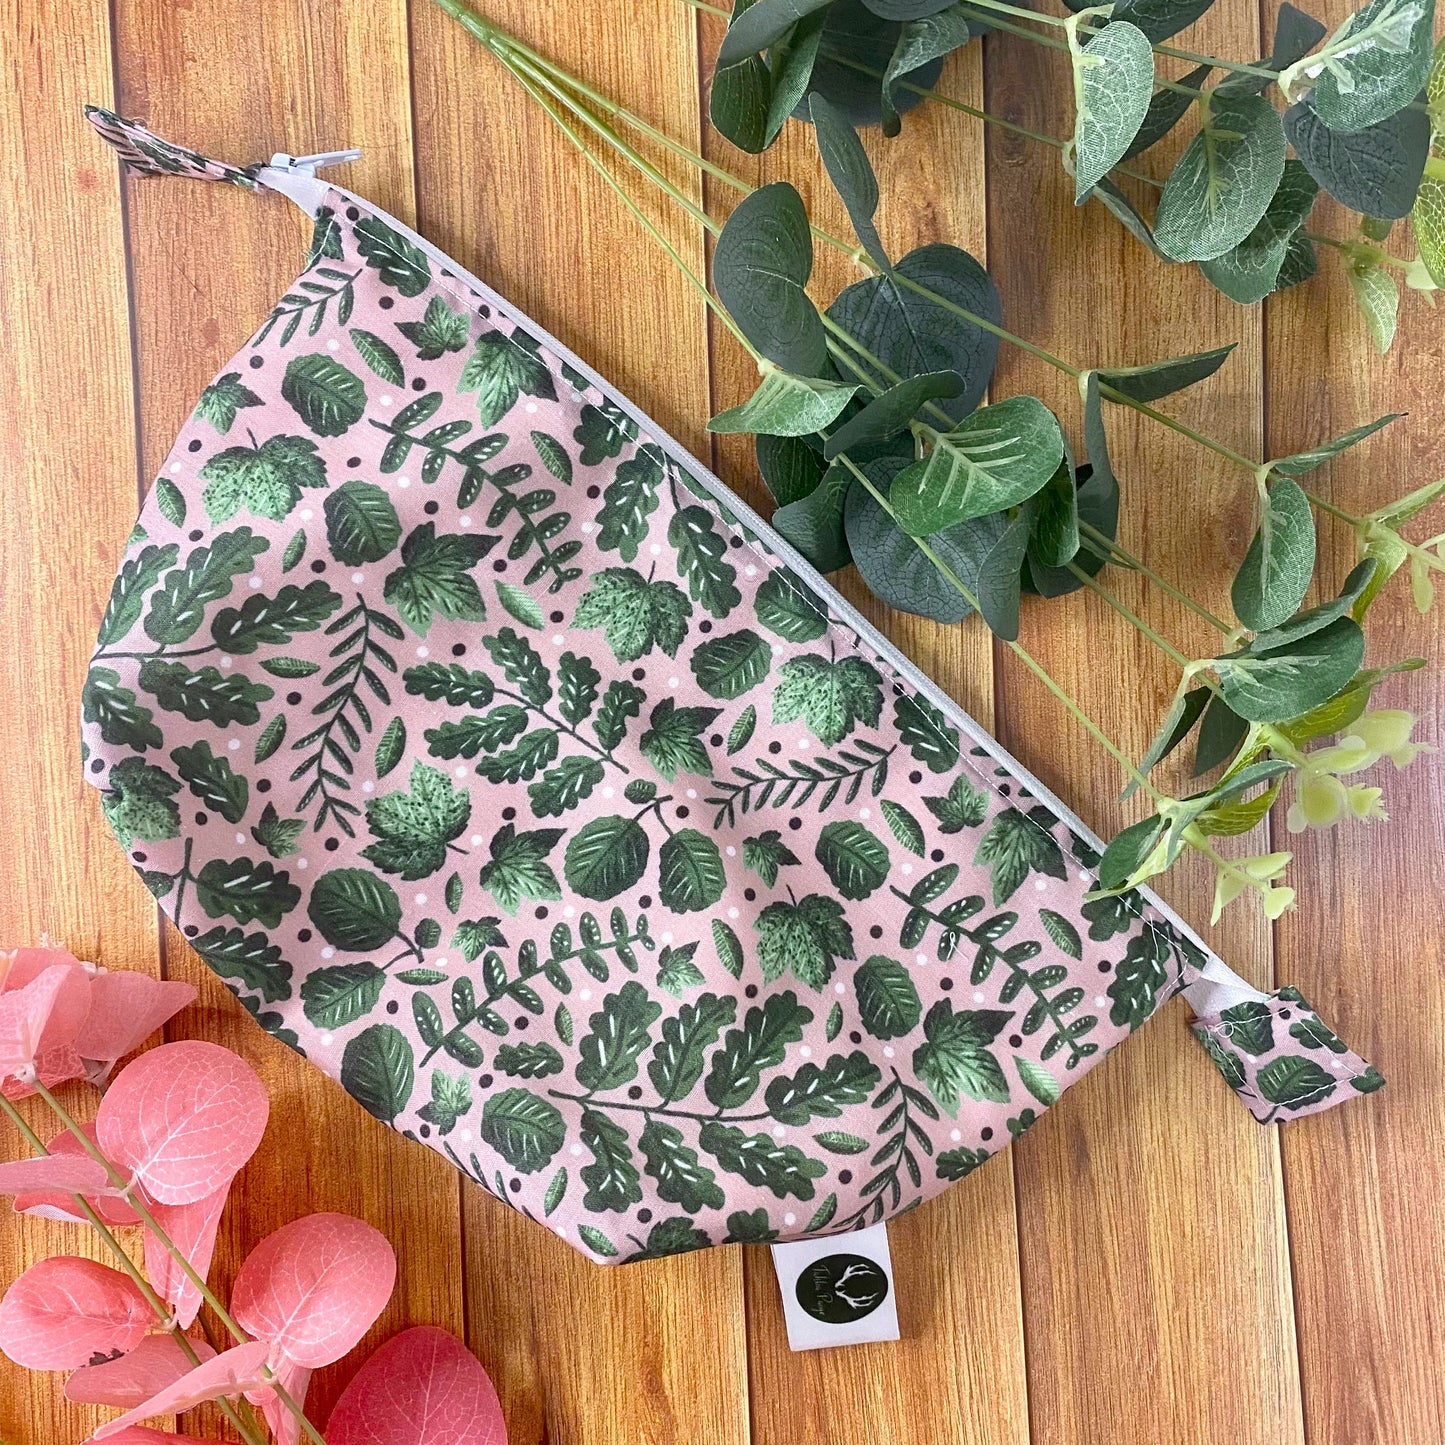 photograph of a green foliage makeup bag on a wooden background with green and pink foliage around it.